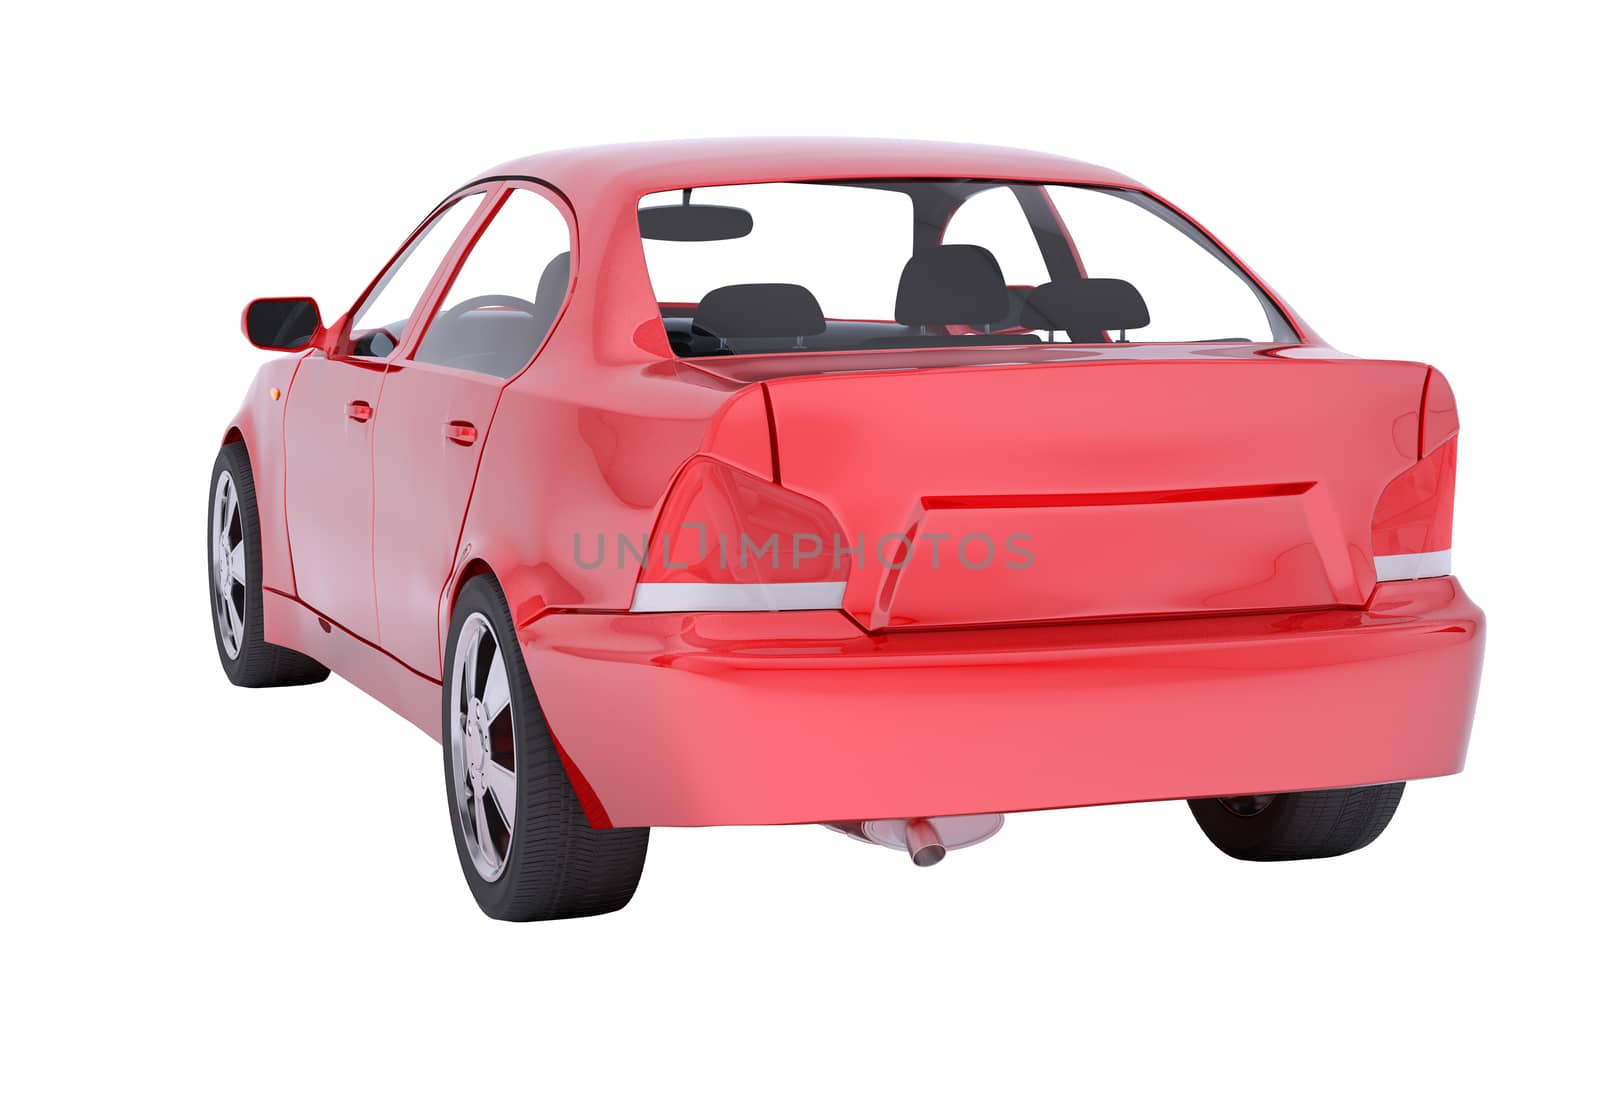 Red car on isolated white background, back view